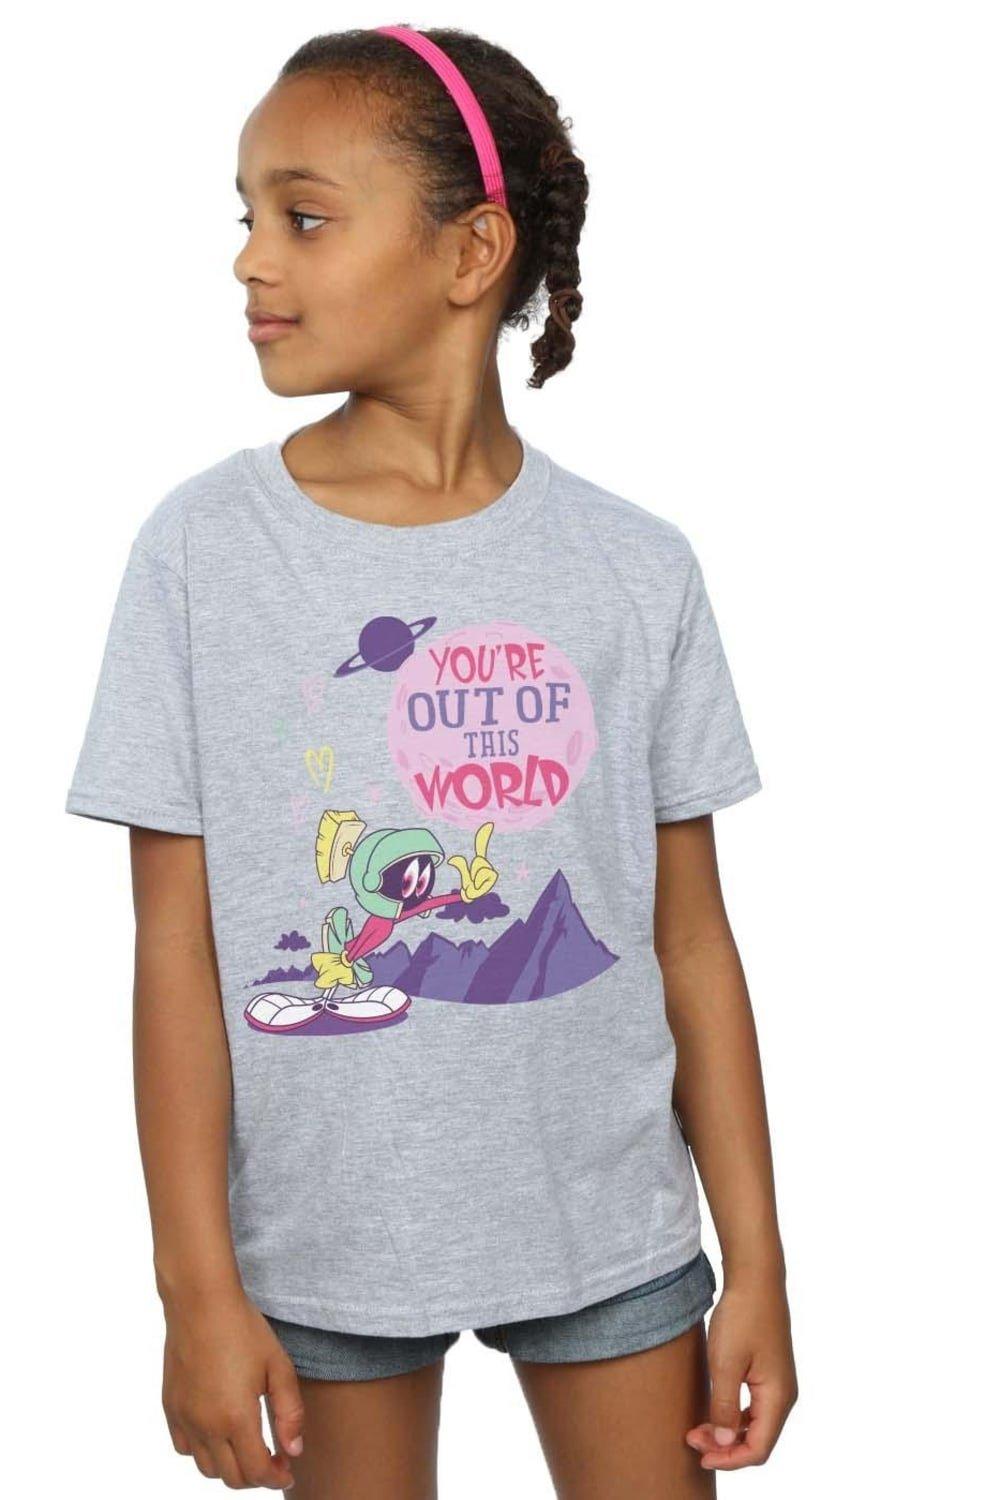 You’re Out Of This World Cotton T-Shirt